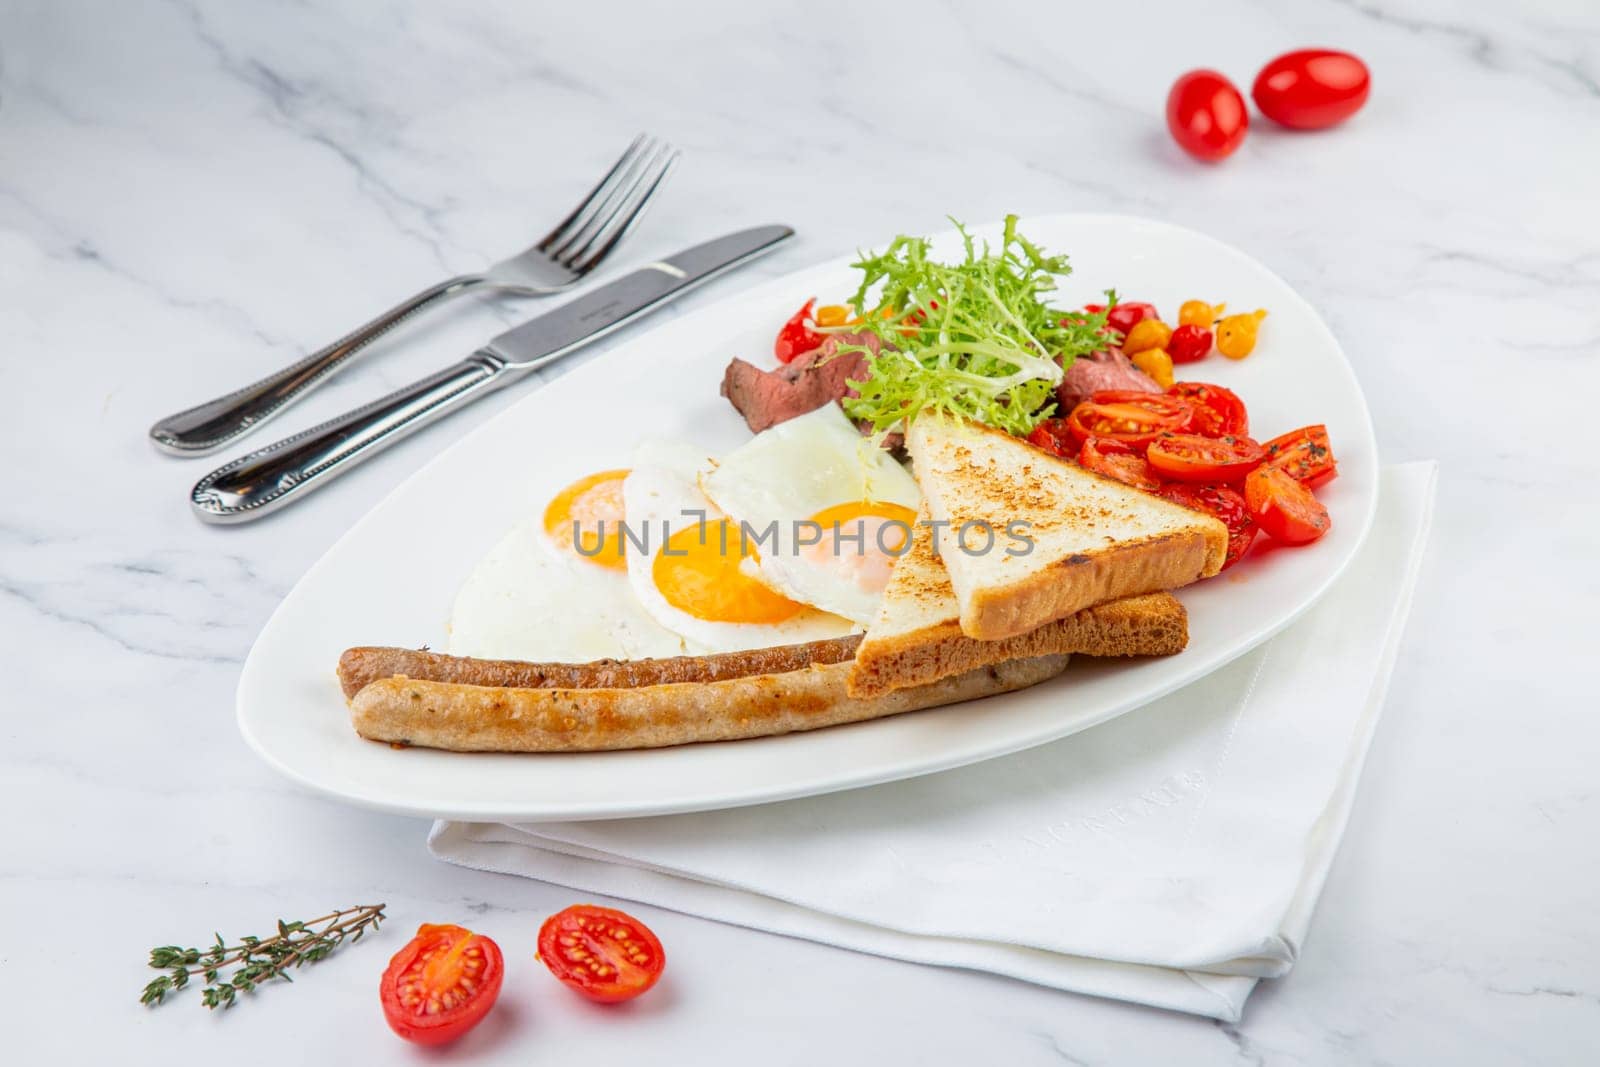 scrambled eggs with vegetables, cherry tomatoes, bread, herbs and sausages on a white plate side view by tewolf